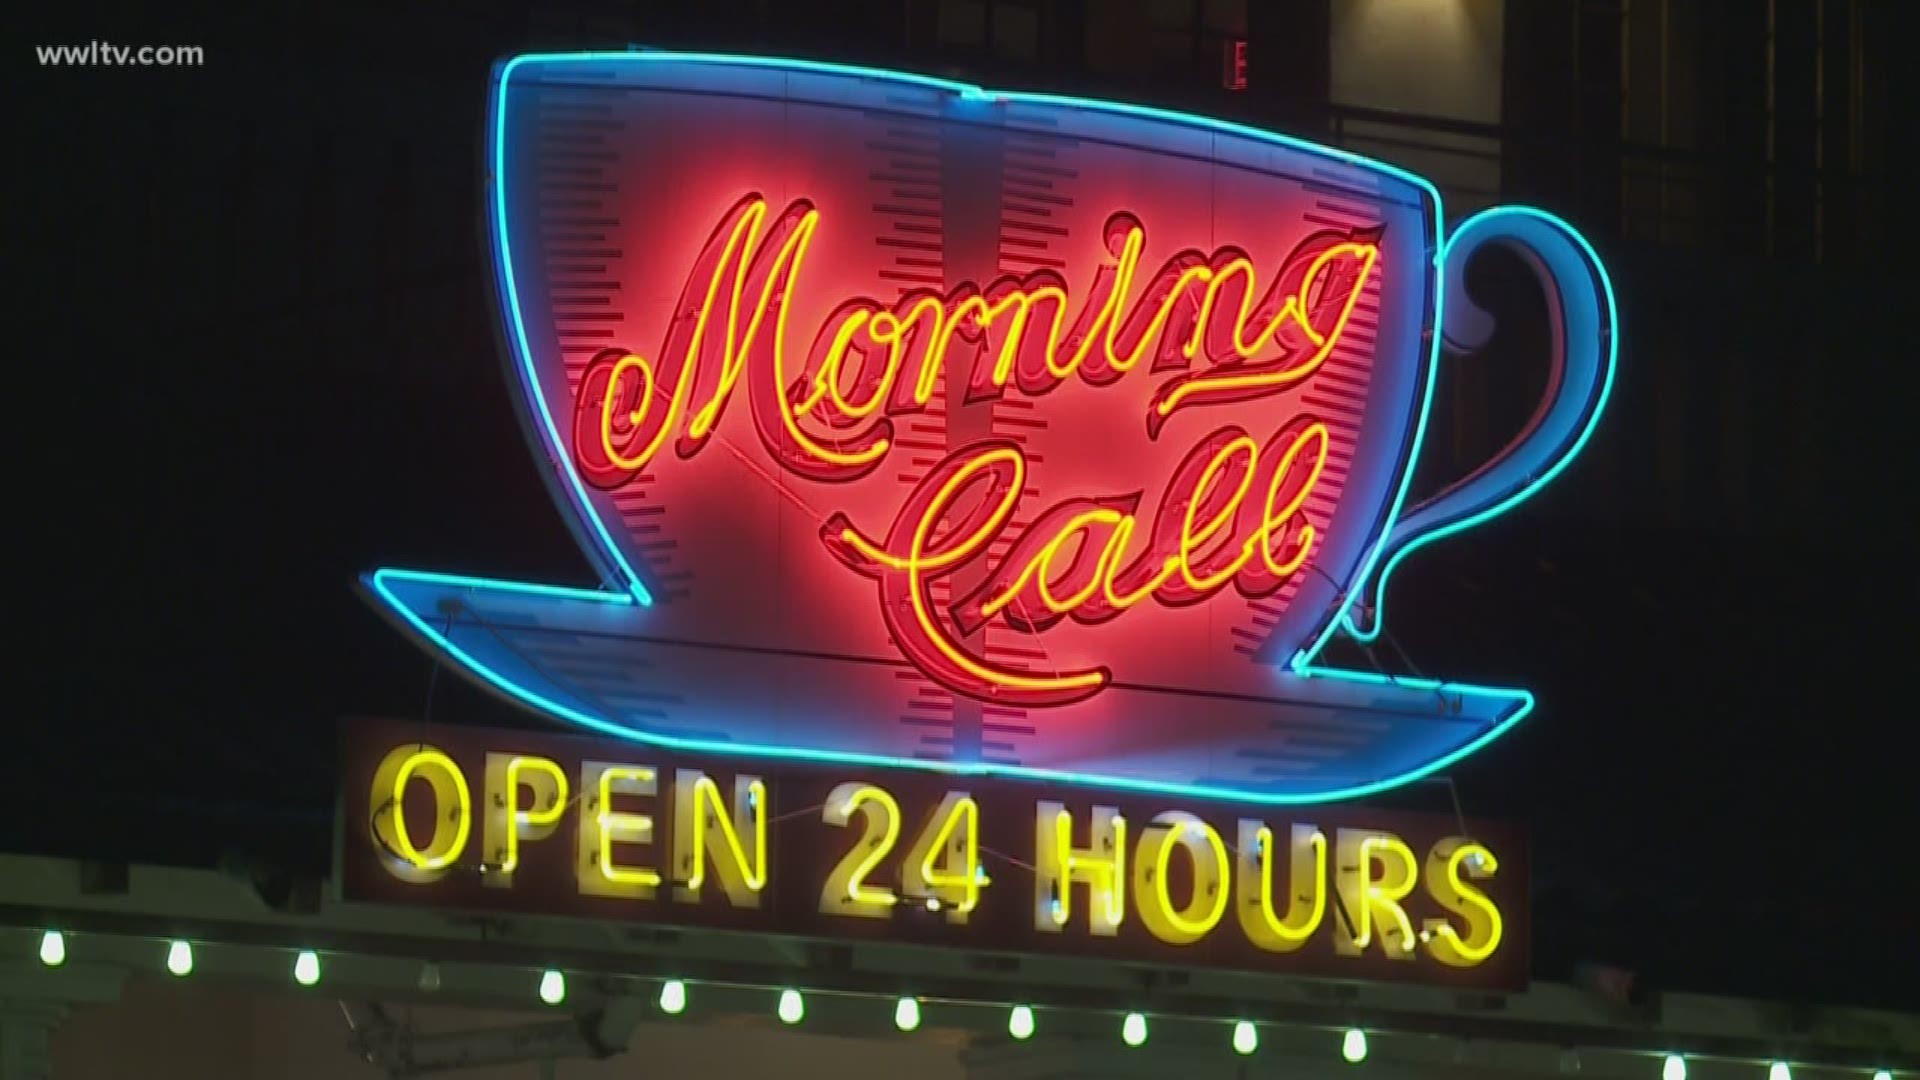 The classic New Orleans cafe drew dozens on Sunday night for its final day of operation.